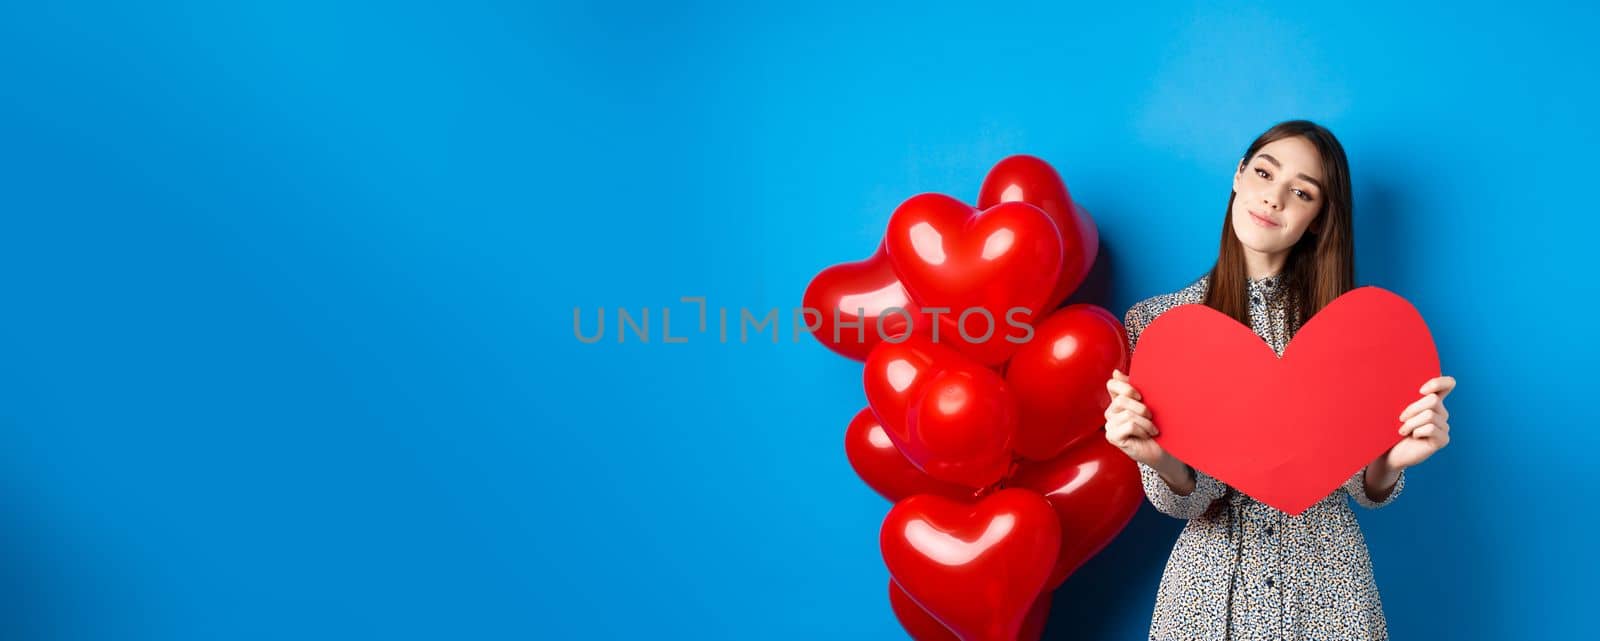 Valentines day. Romantic girl in dress showing big red heart cutout, dreaming of love, standing near holiday balloons on blue background by Benzoix